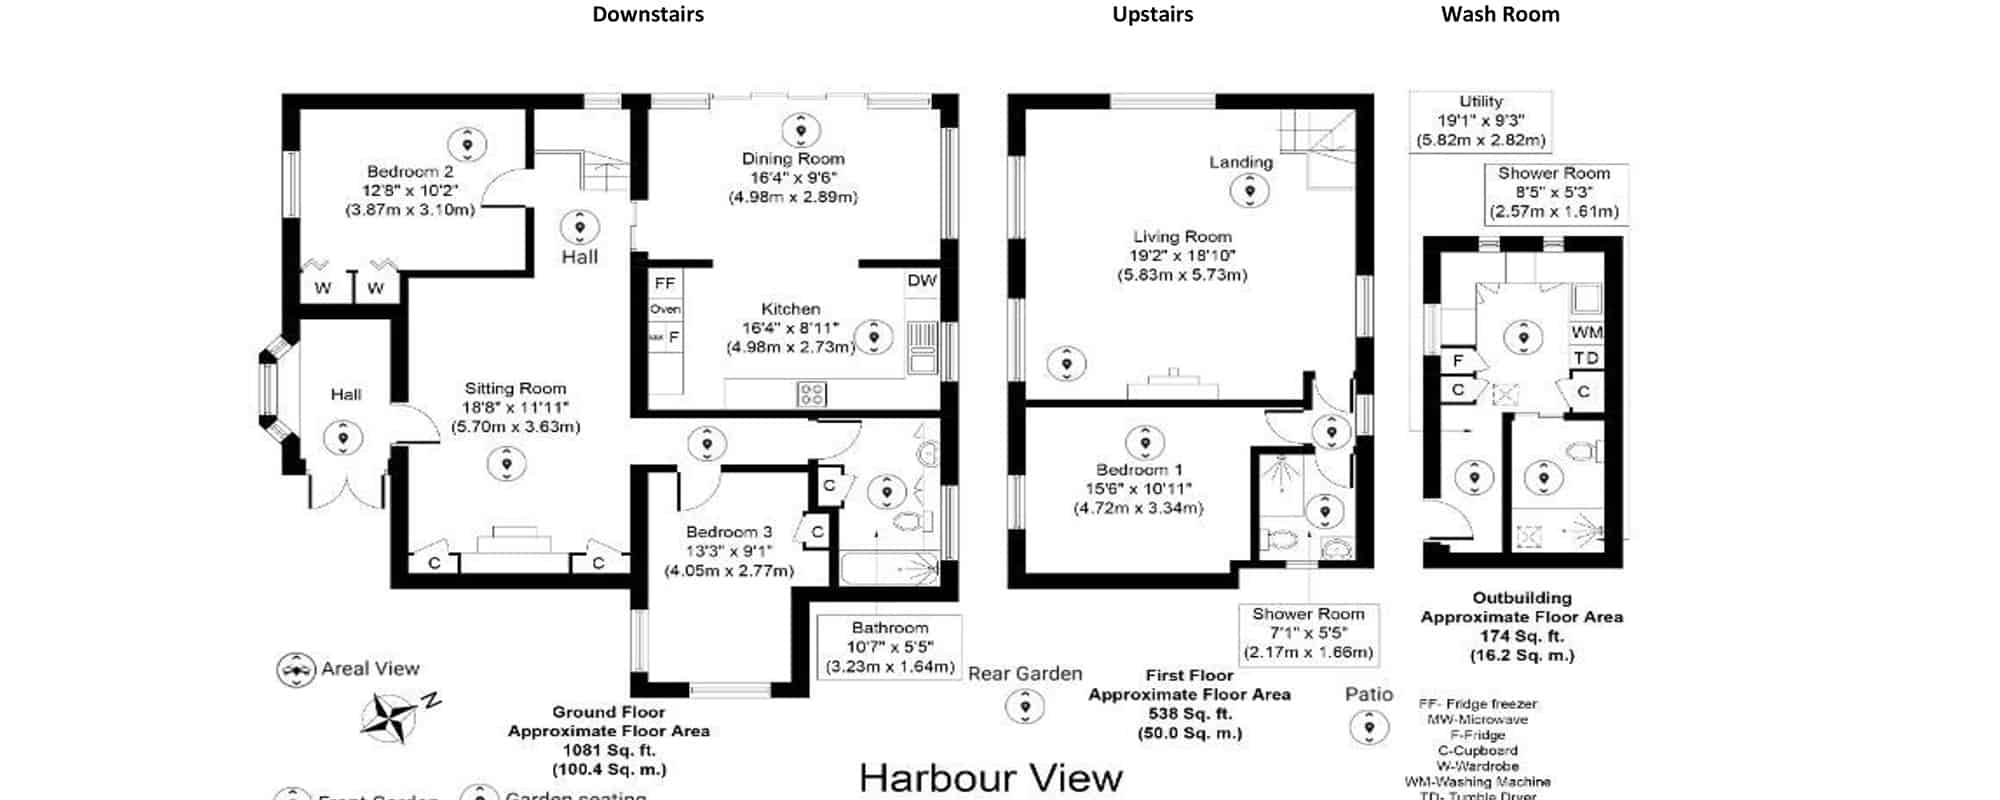 Floorplan-Harbour-View-House-Dell-Quay